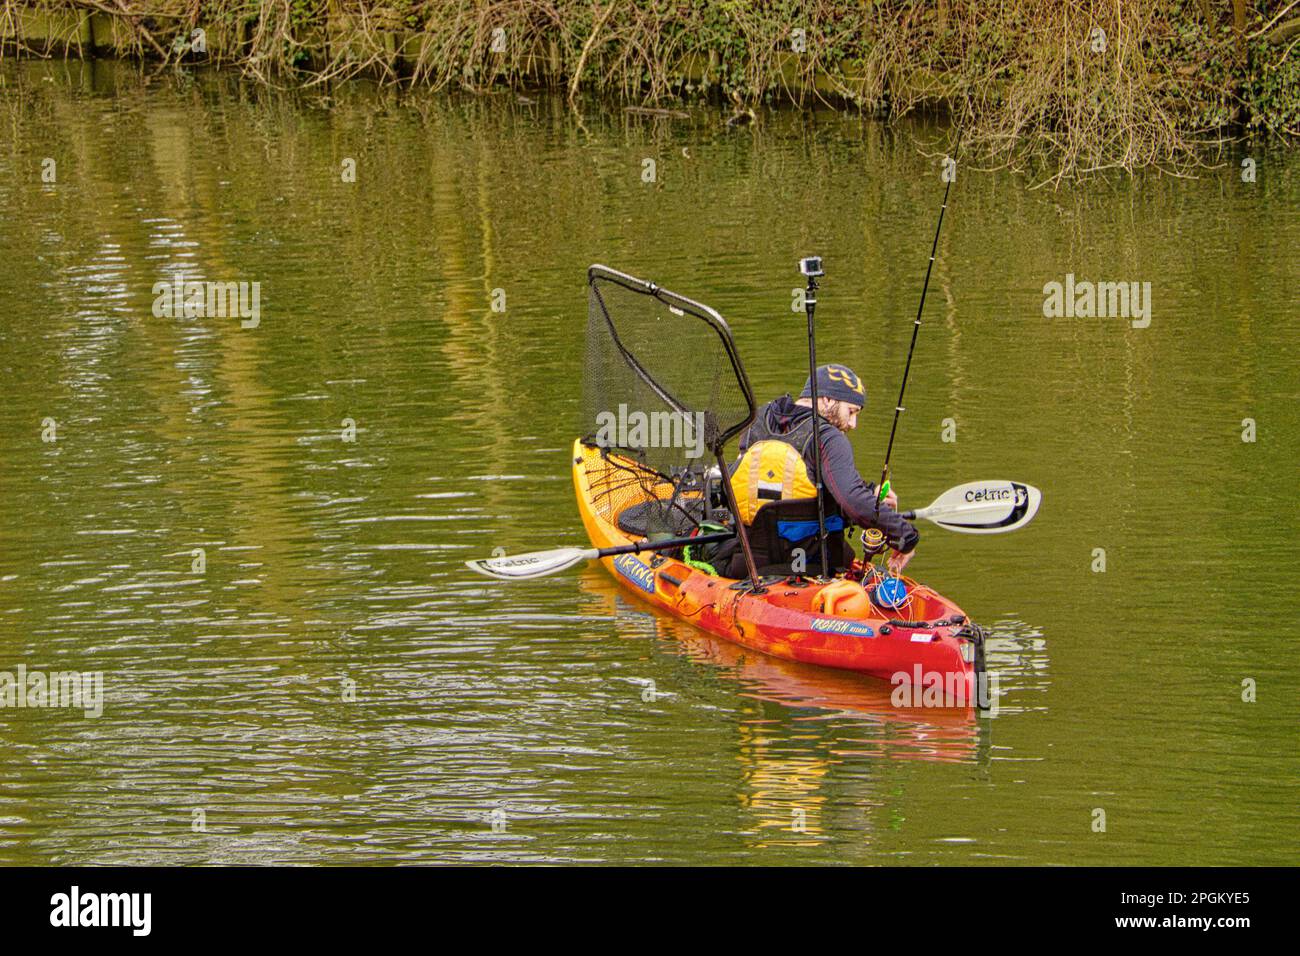 Fisherman In A Boat, River Thames Stock Photo